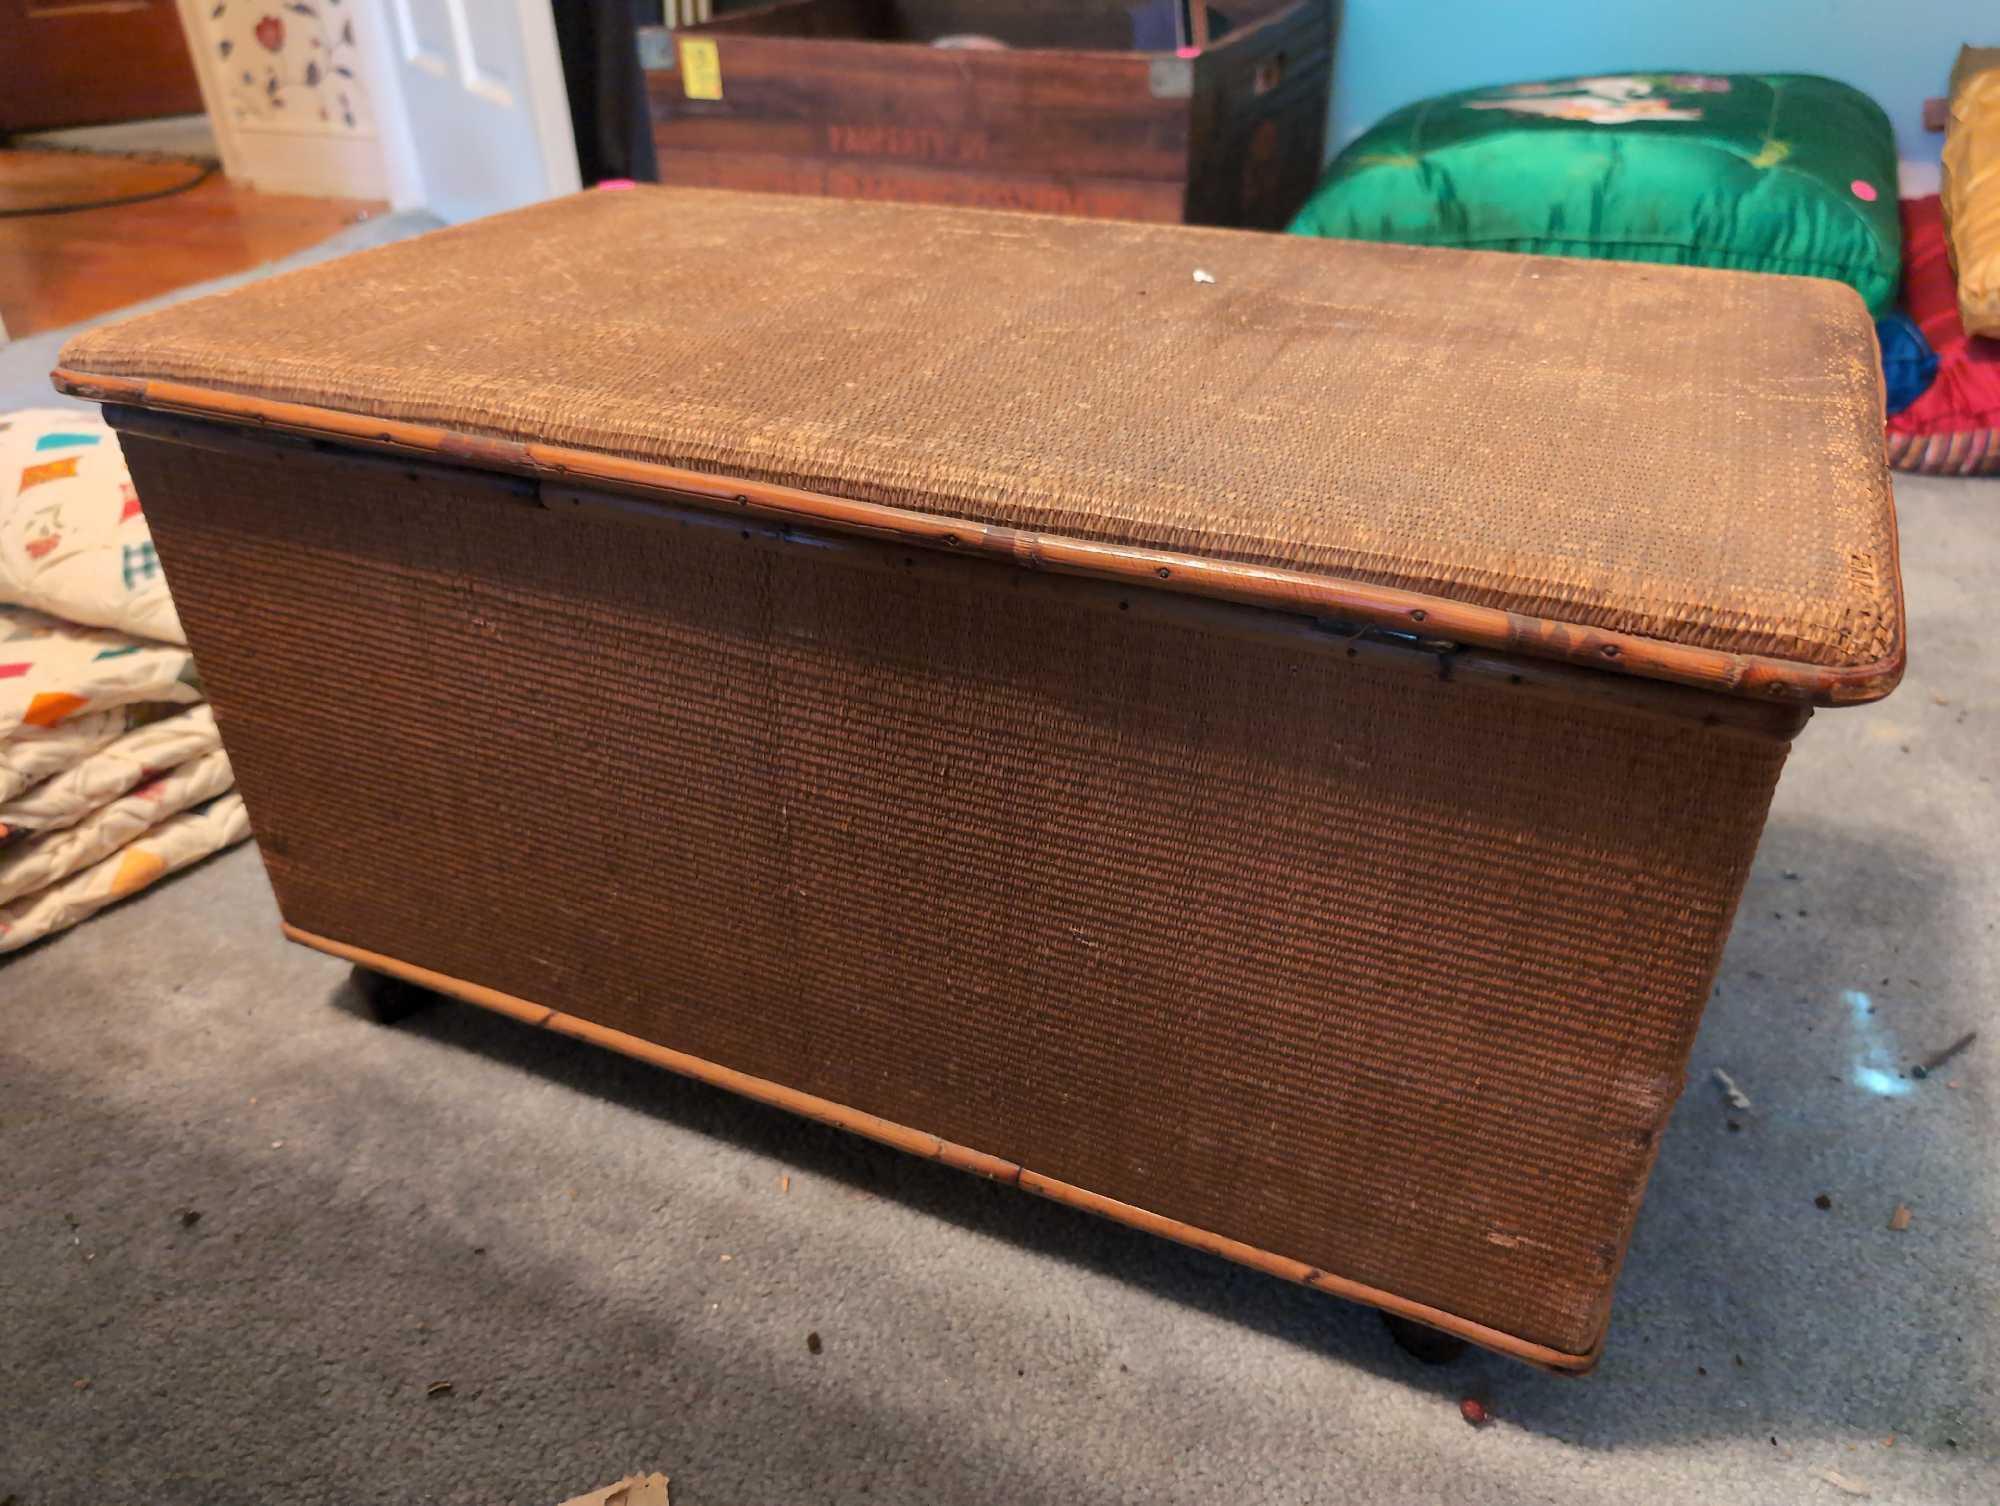 (BR2) VINTAGE BAMBOO AND RAFFIA LIFT TOP BLANKET CHEST WITH HANDLES. MEASURES 25-1/2"W X 14-1/2"D X